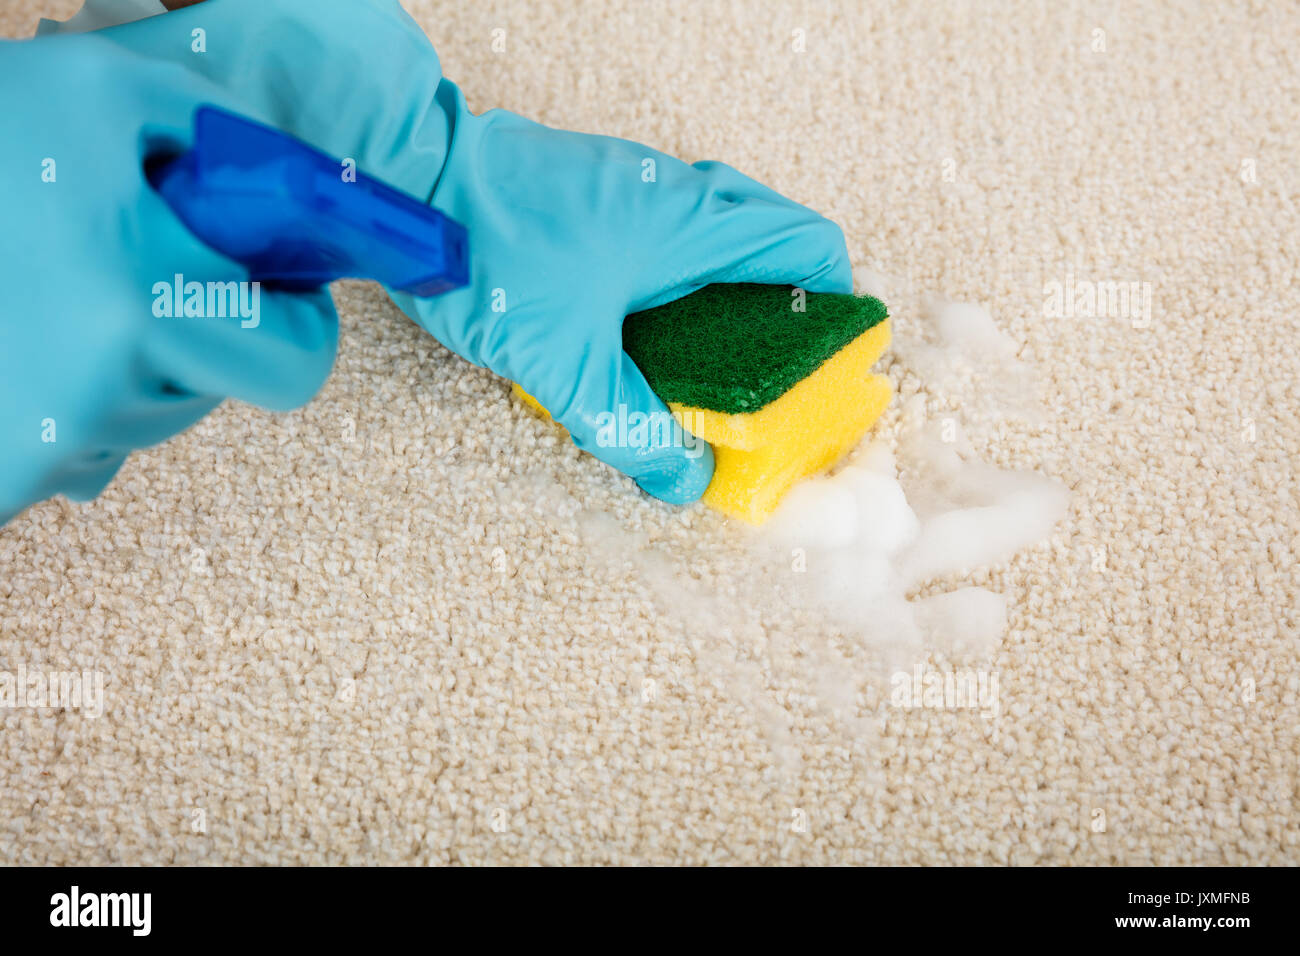 Close-up Of Person's Hand Cleaning Carpet With Sponge Stock Photo